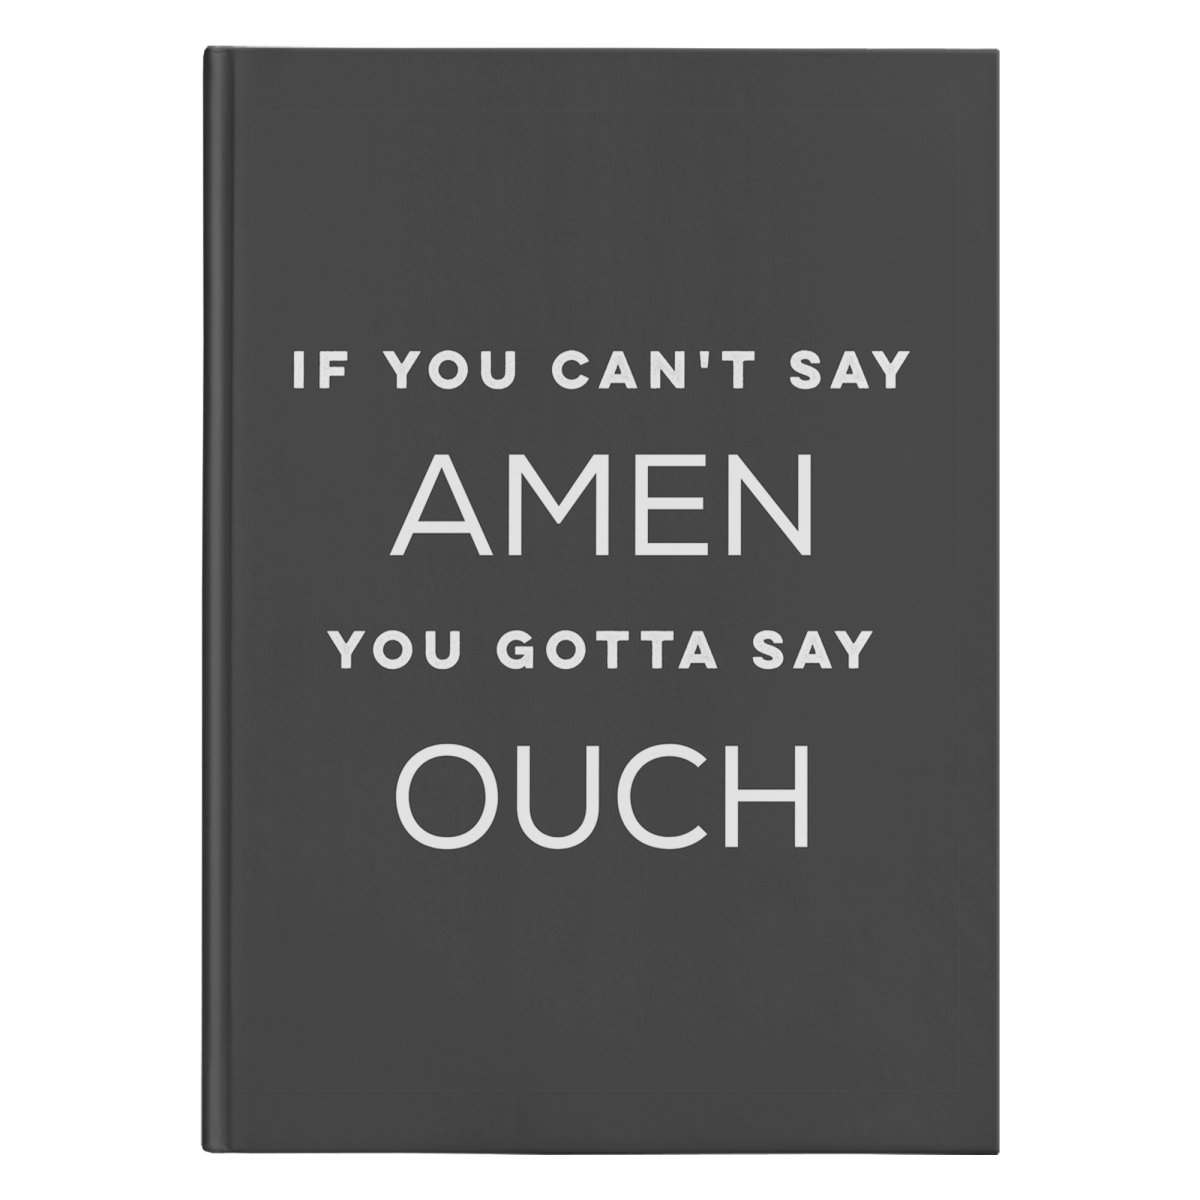 If You Can't Say Amen (150 Page Hardcover Journal) - SDG Clothing